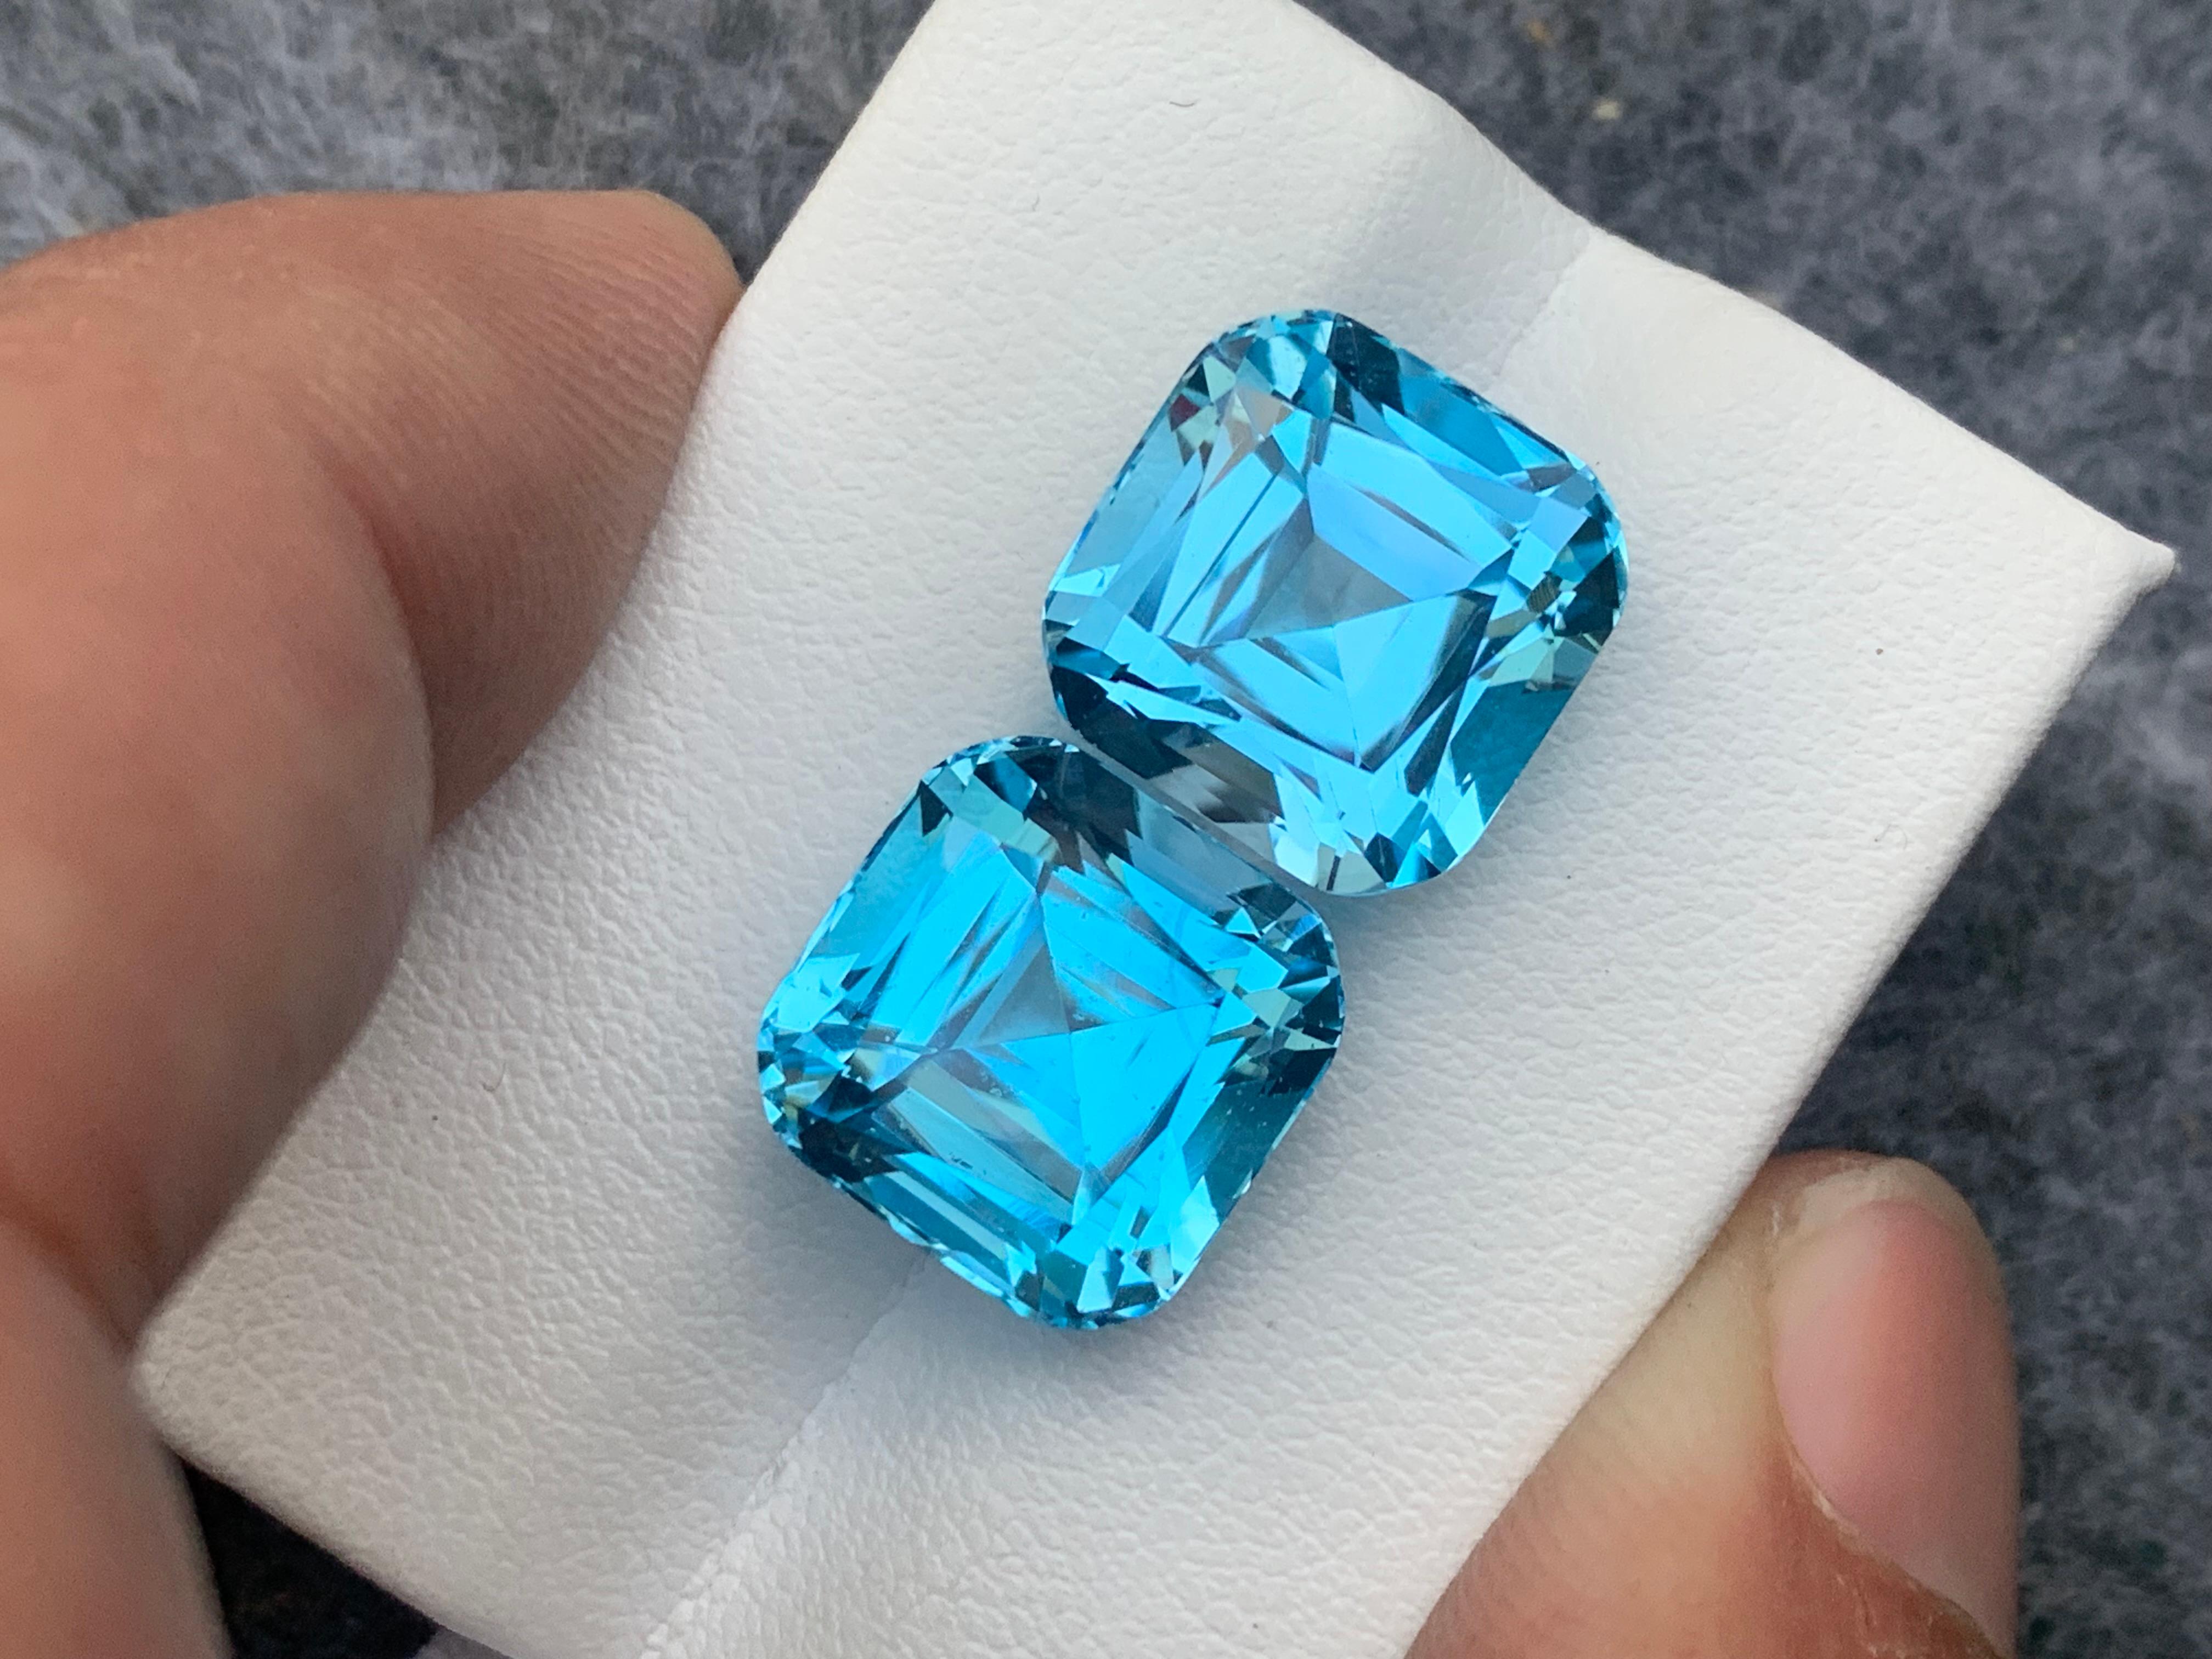 Cushion Cut Exceptional Gorgeous Loose Sky Blue Topaz Pairs 25.40 Carat For Earrings Jewelry For Sale